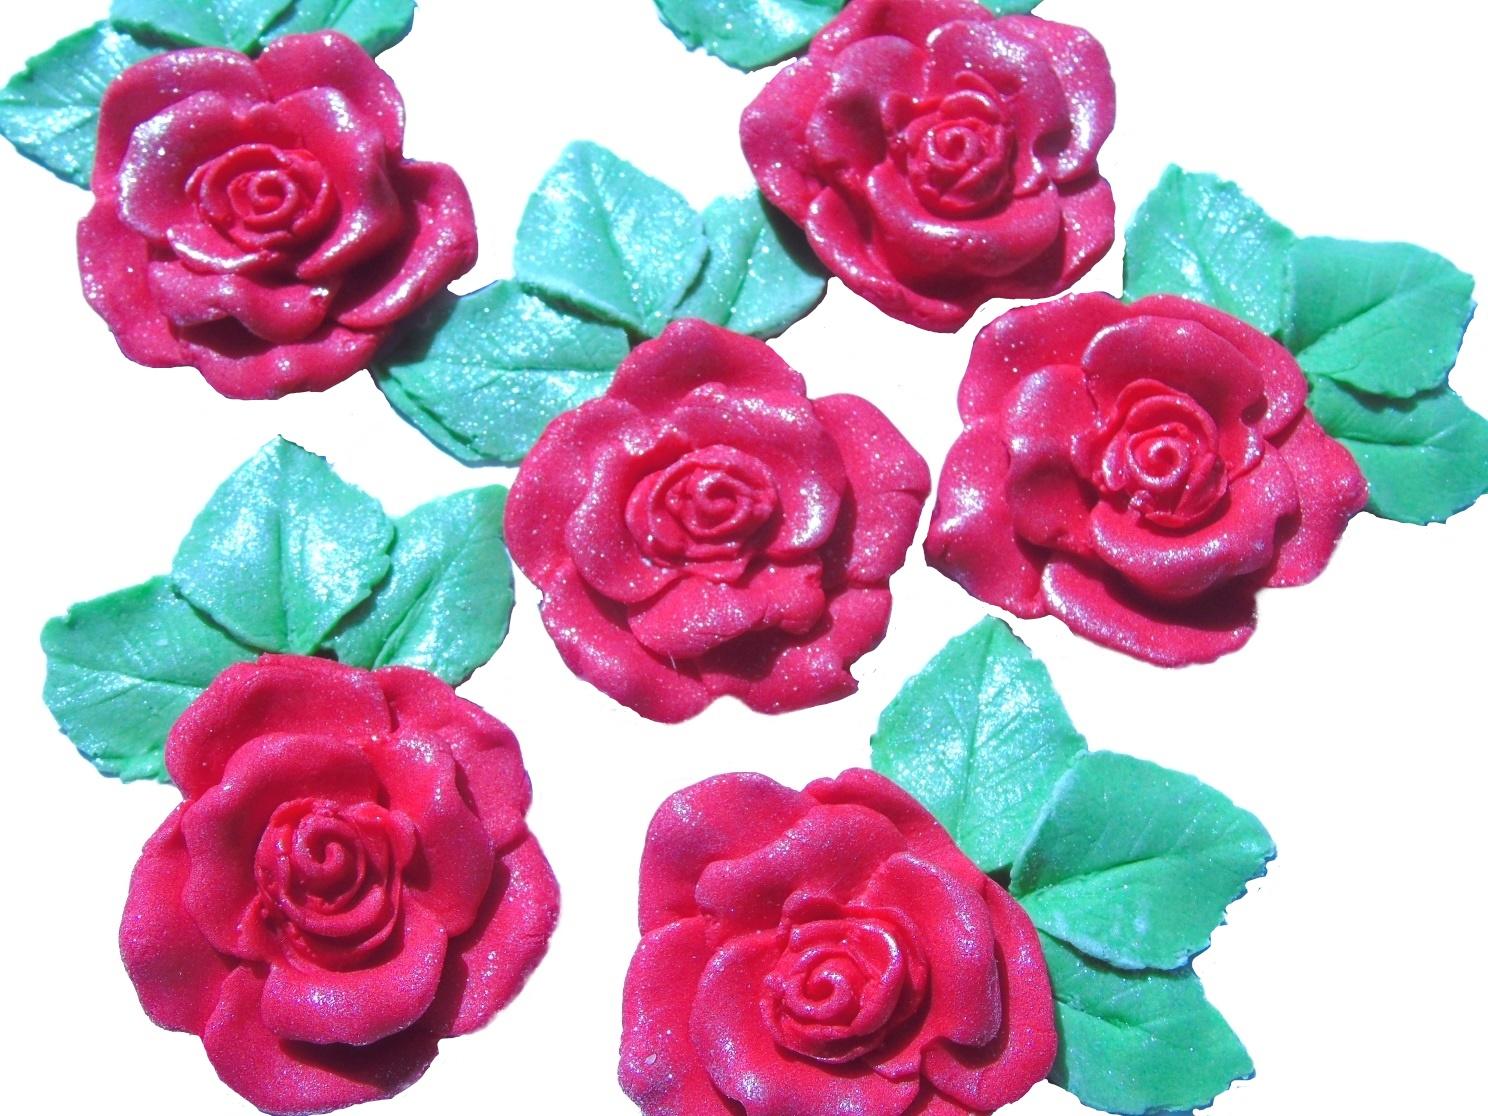 6 Large Red Glittered Roses with leaves Vegan  Birthday Wedding Cake Toppers